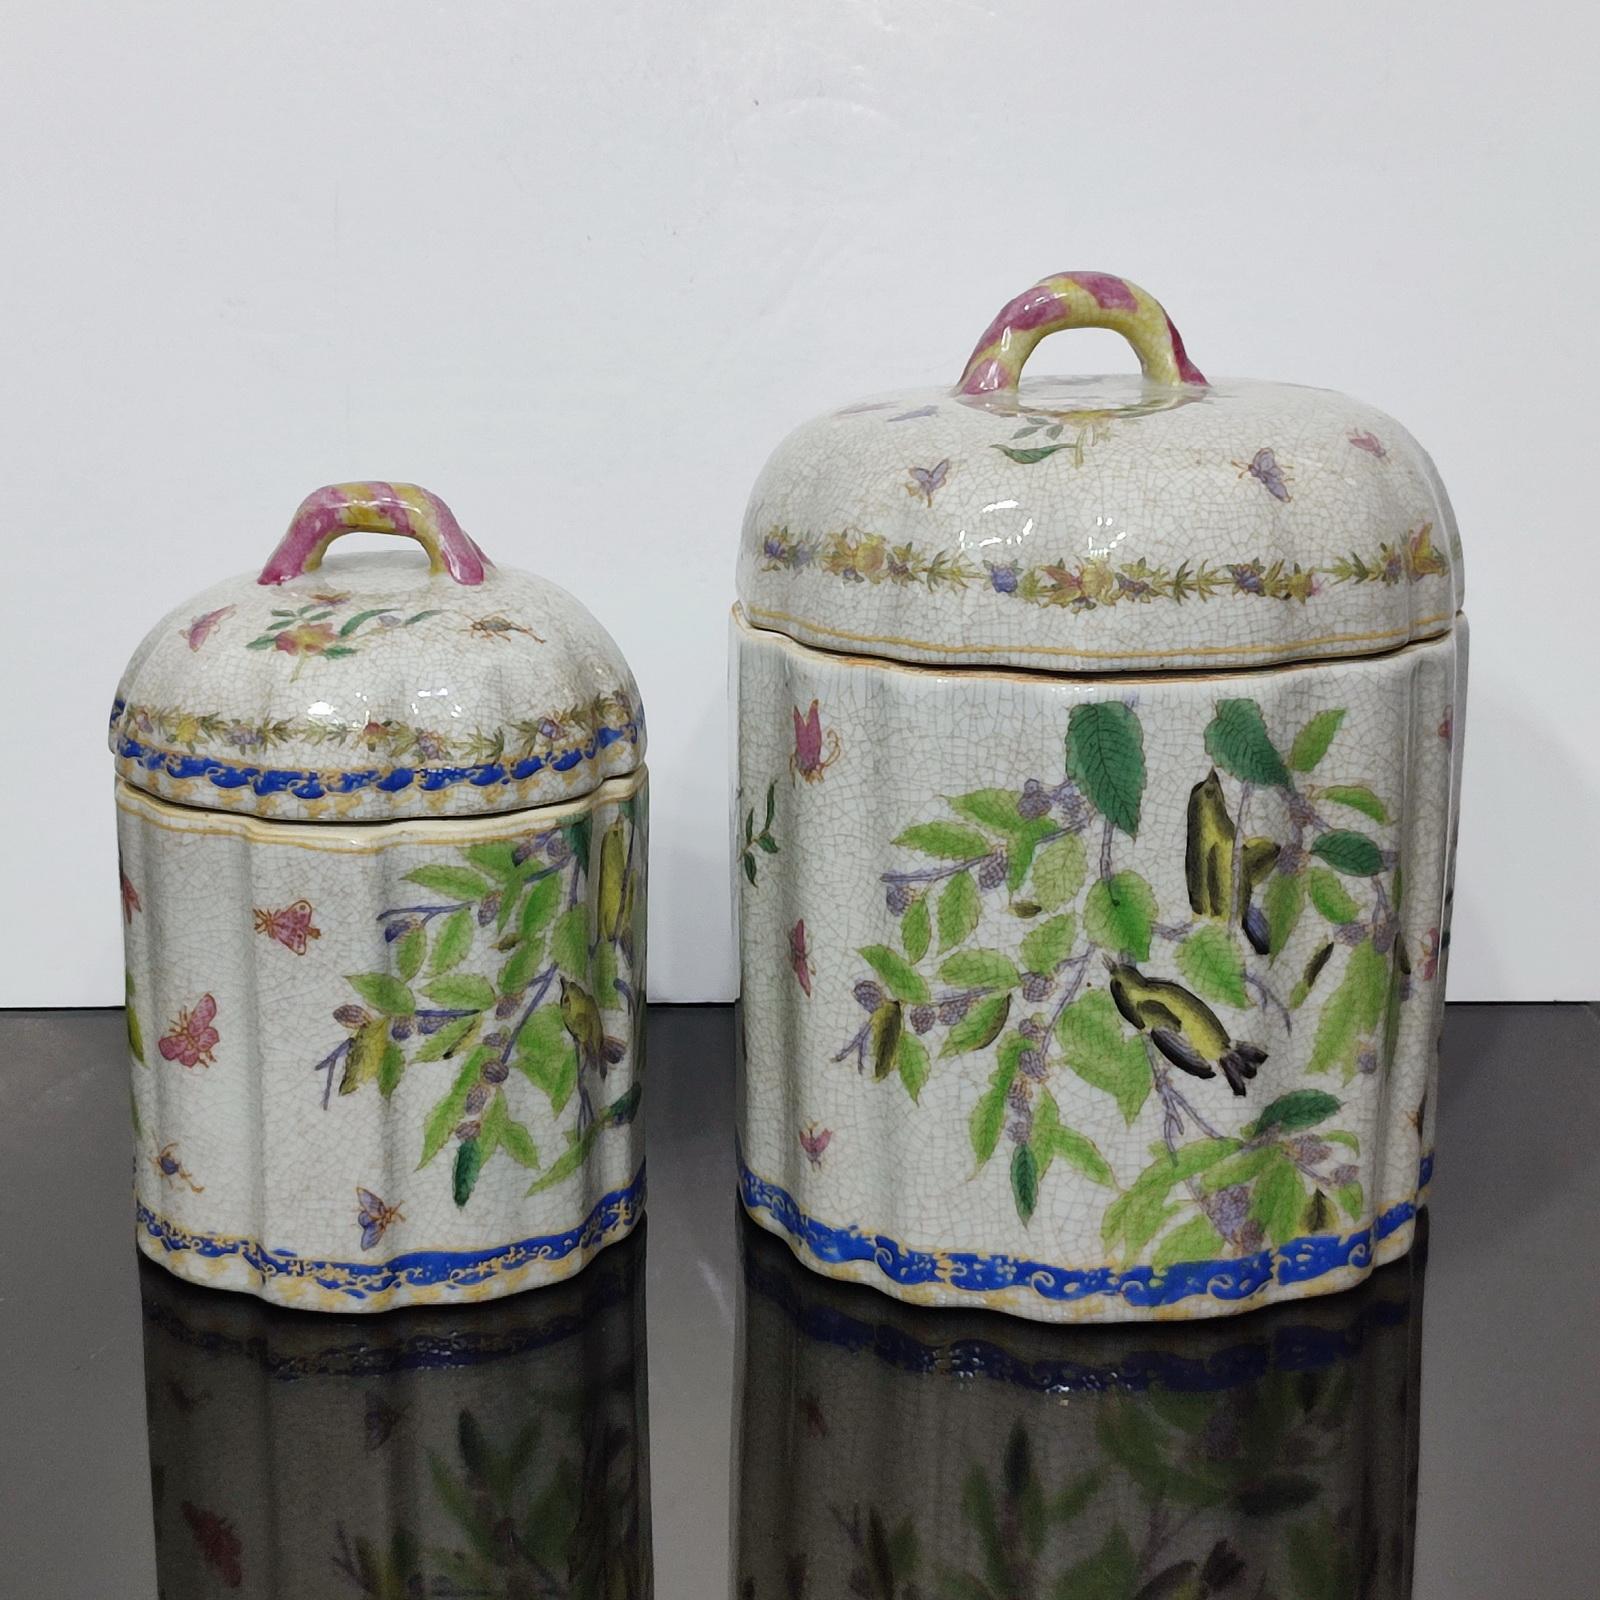 Pair of Craqueled Ceramic Lidded Jars, Vintage from the 1990s - FREE SHIPPING In Good Condition For Sale In Bochum, NRW